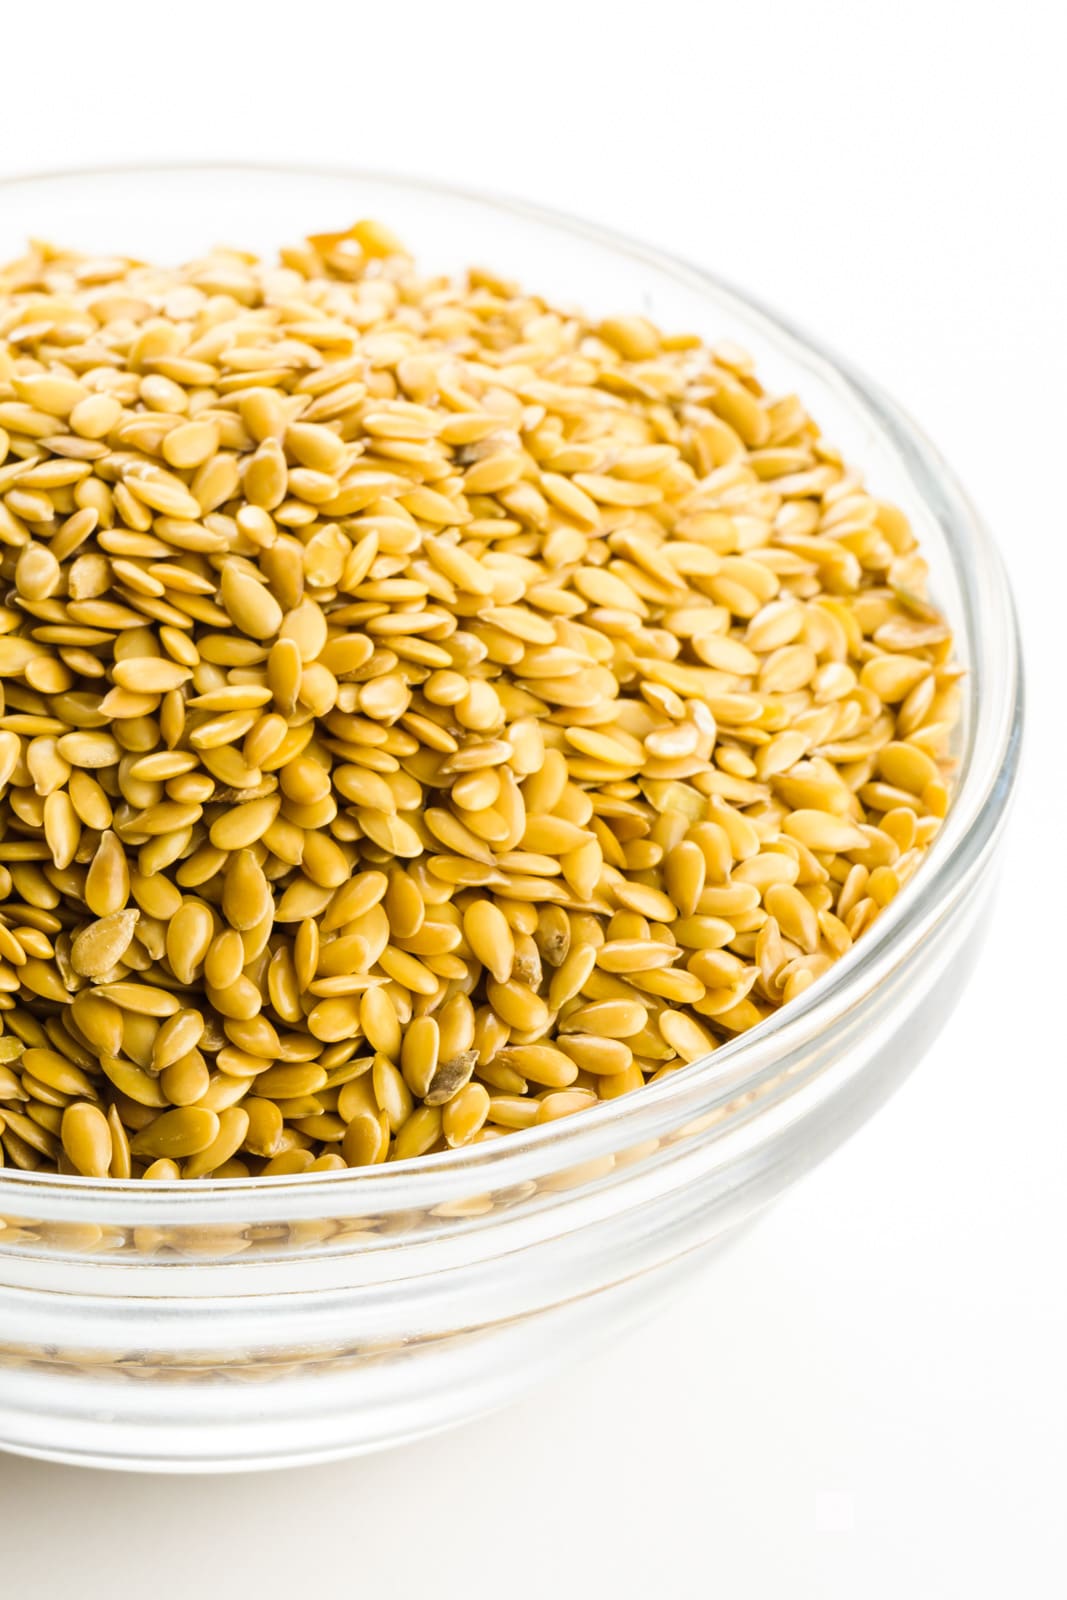 A bowl is full of whole golden flax seeds.